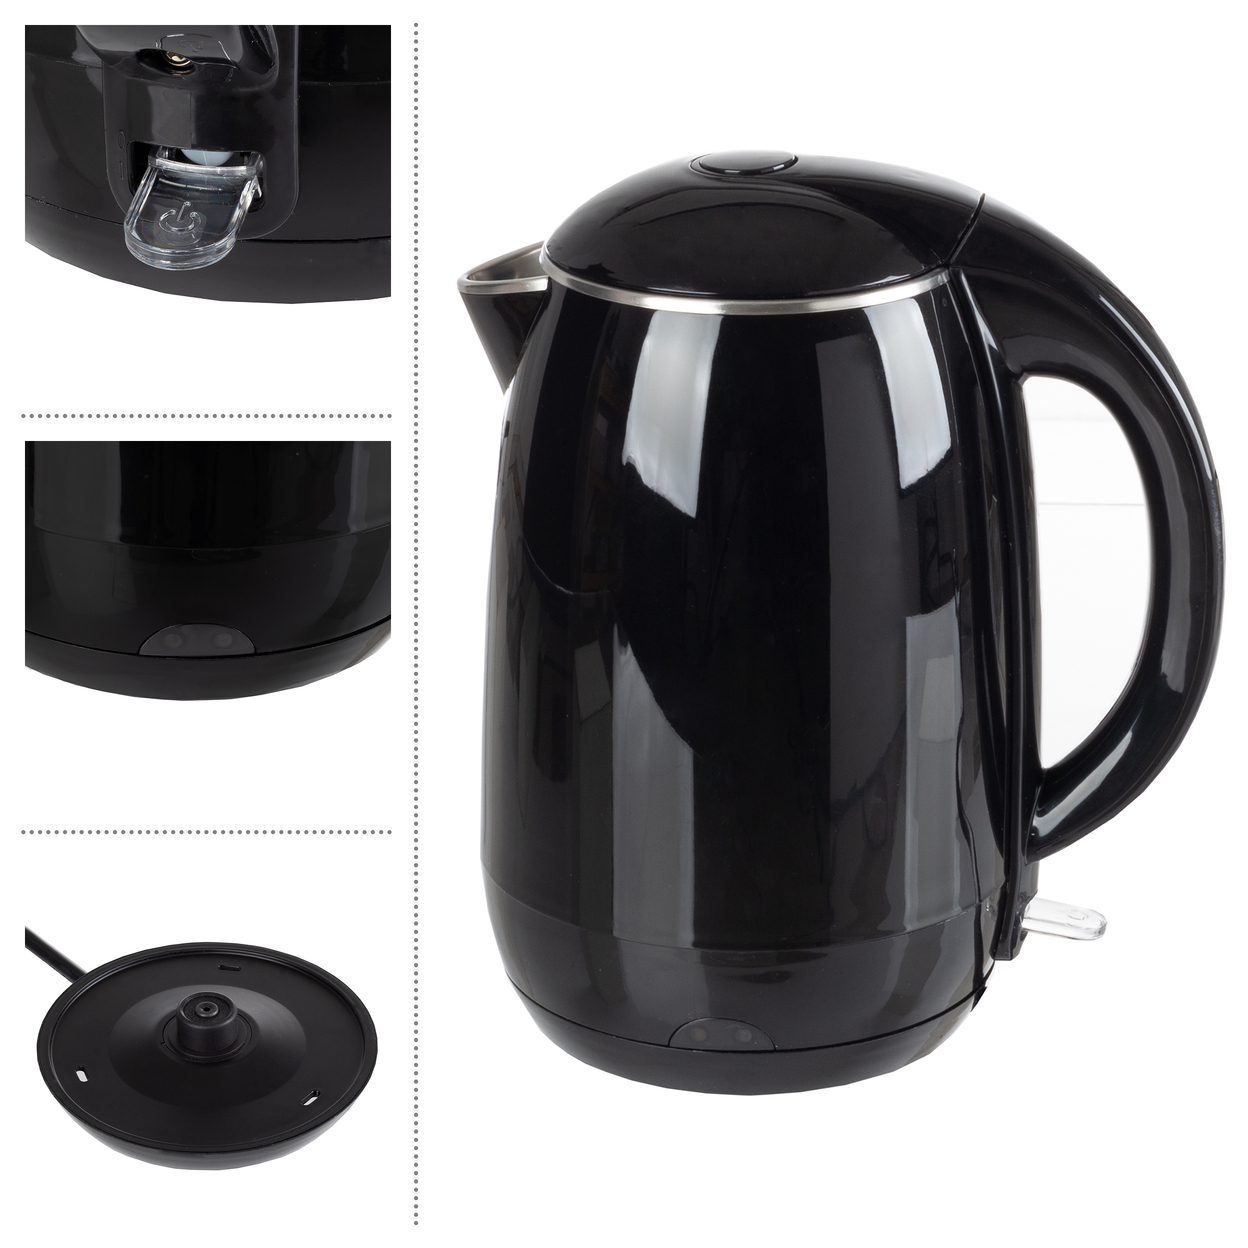 Electric Kettle Rapid Boil Steel Interior Auto Shut Off Counter Top Water Heater